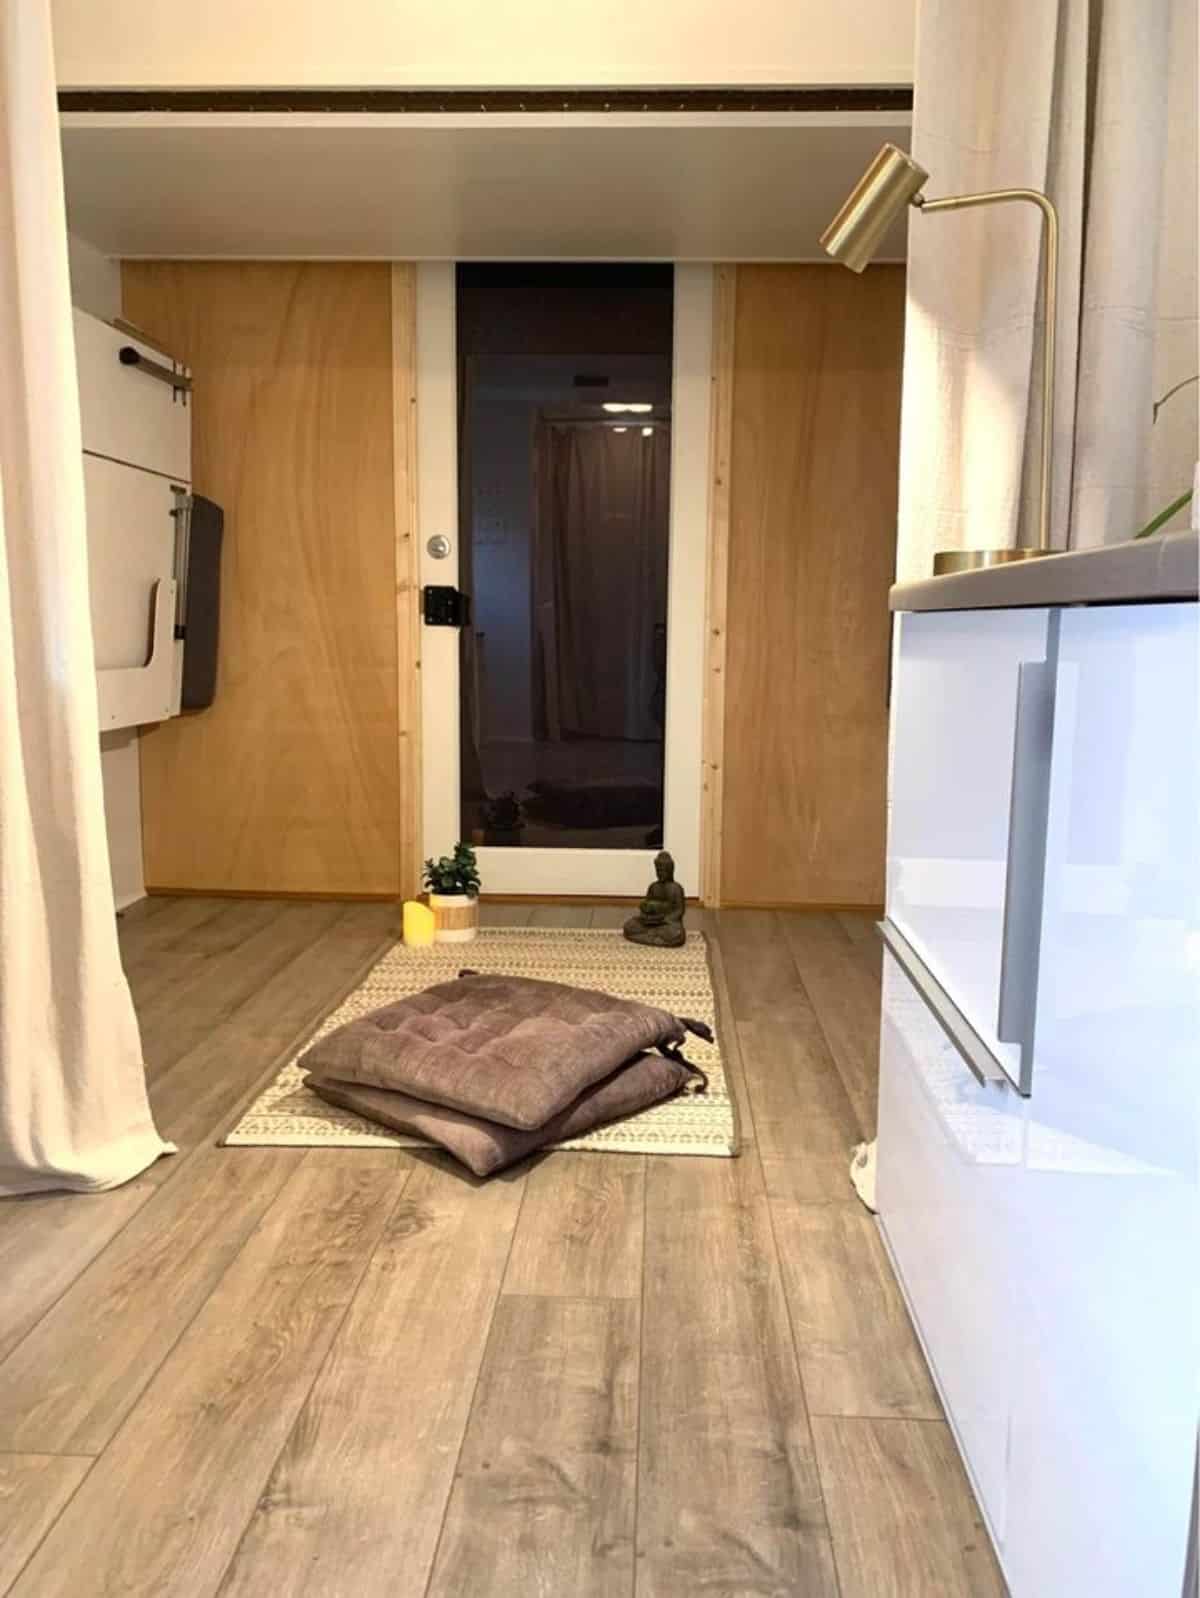 Foldable bed in the living area can be used as additional sleeping area of 20' Compact Tiny House